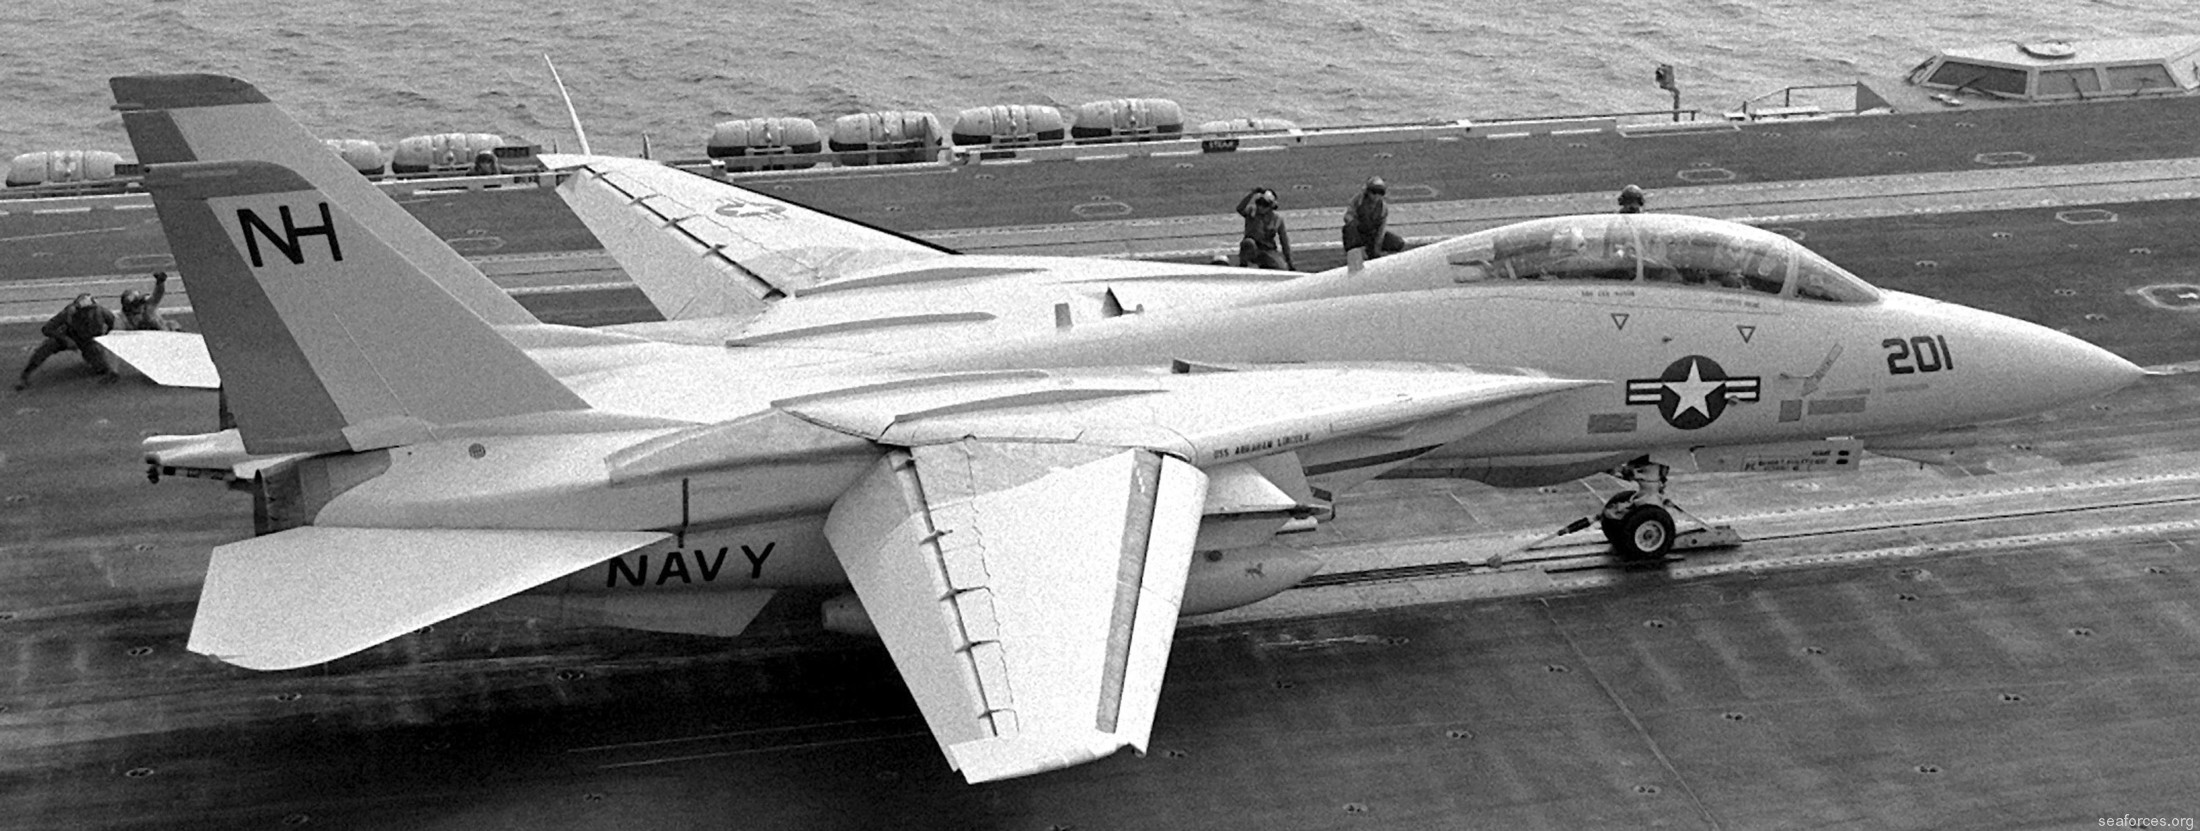 vf-213 black lions fighter squadron us navy f-14a tomcat carrier air wing cvw-11 uss abraham lincoln cvn-72 79